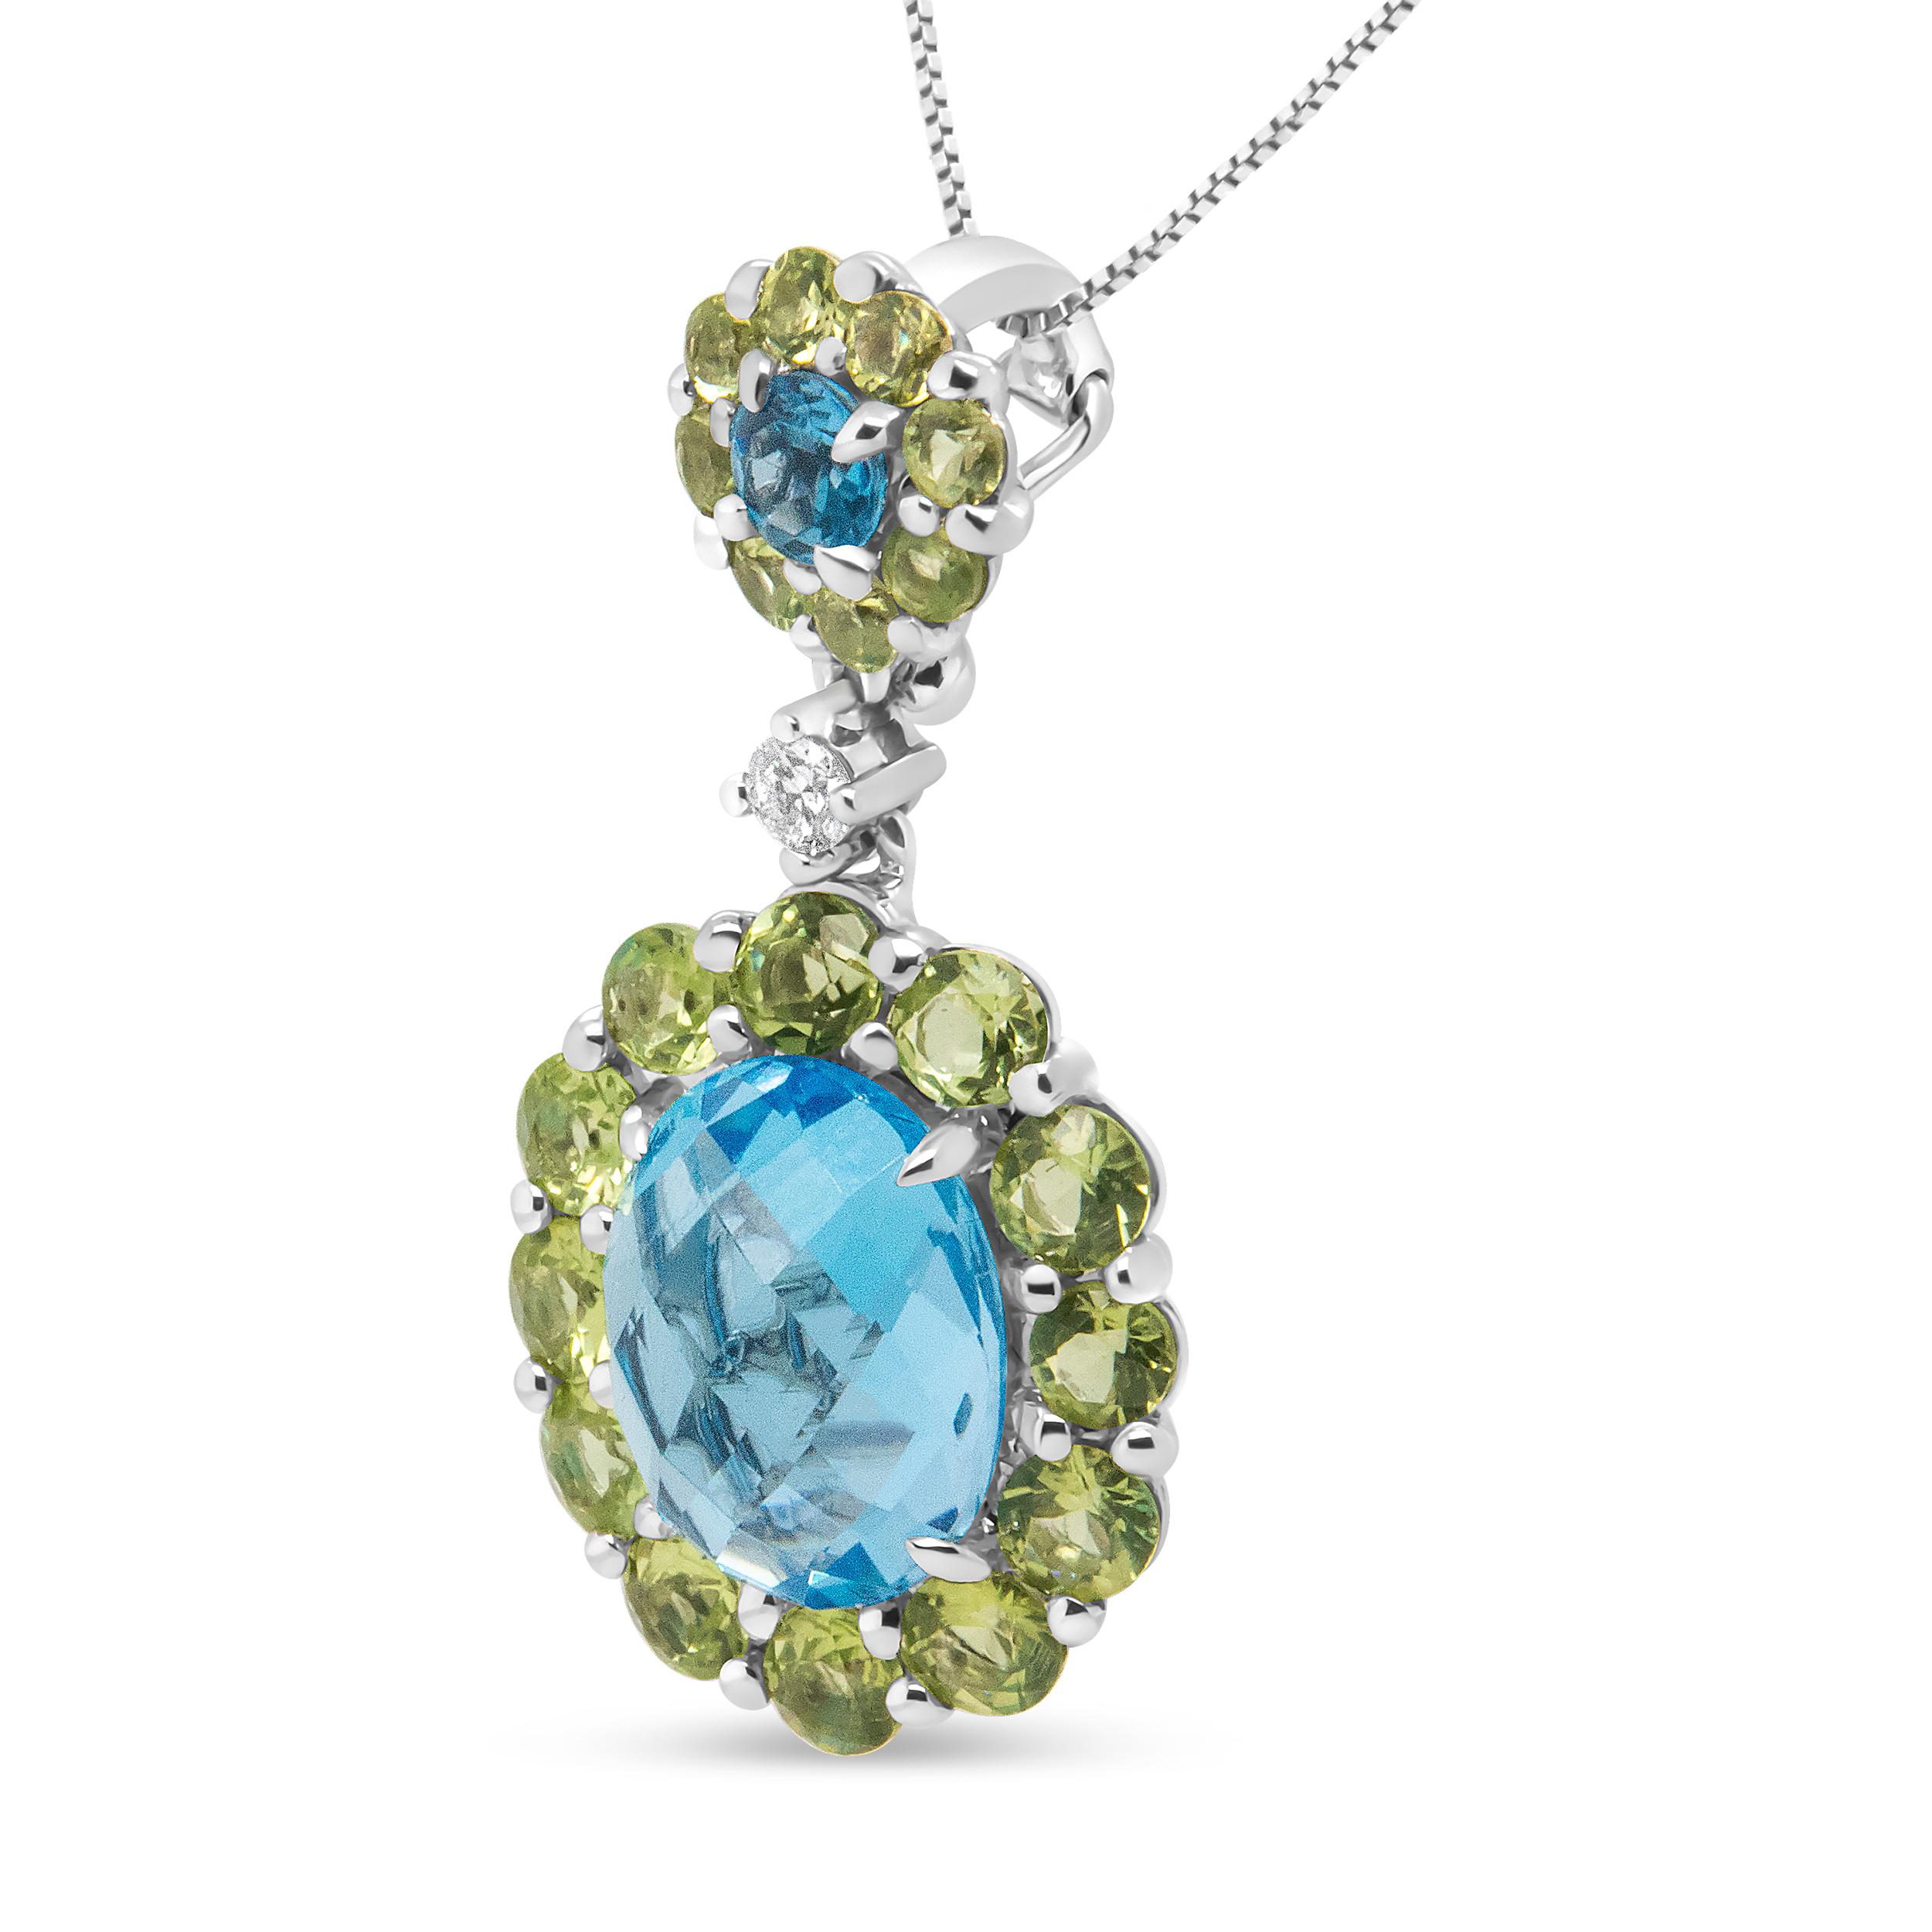 Elegant in its graceful drop design, this pendant necklace sparkles wildly with its collection of diamond and gemstones prong-set into polished 18k white gold. The bail features a center gemstone that is a 3.5mm round blue topaz haled by 2.5mm round